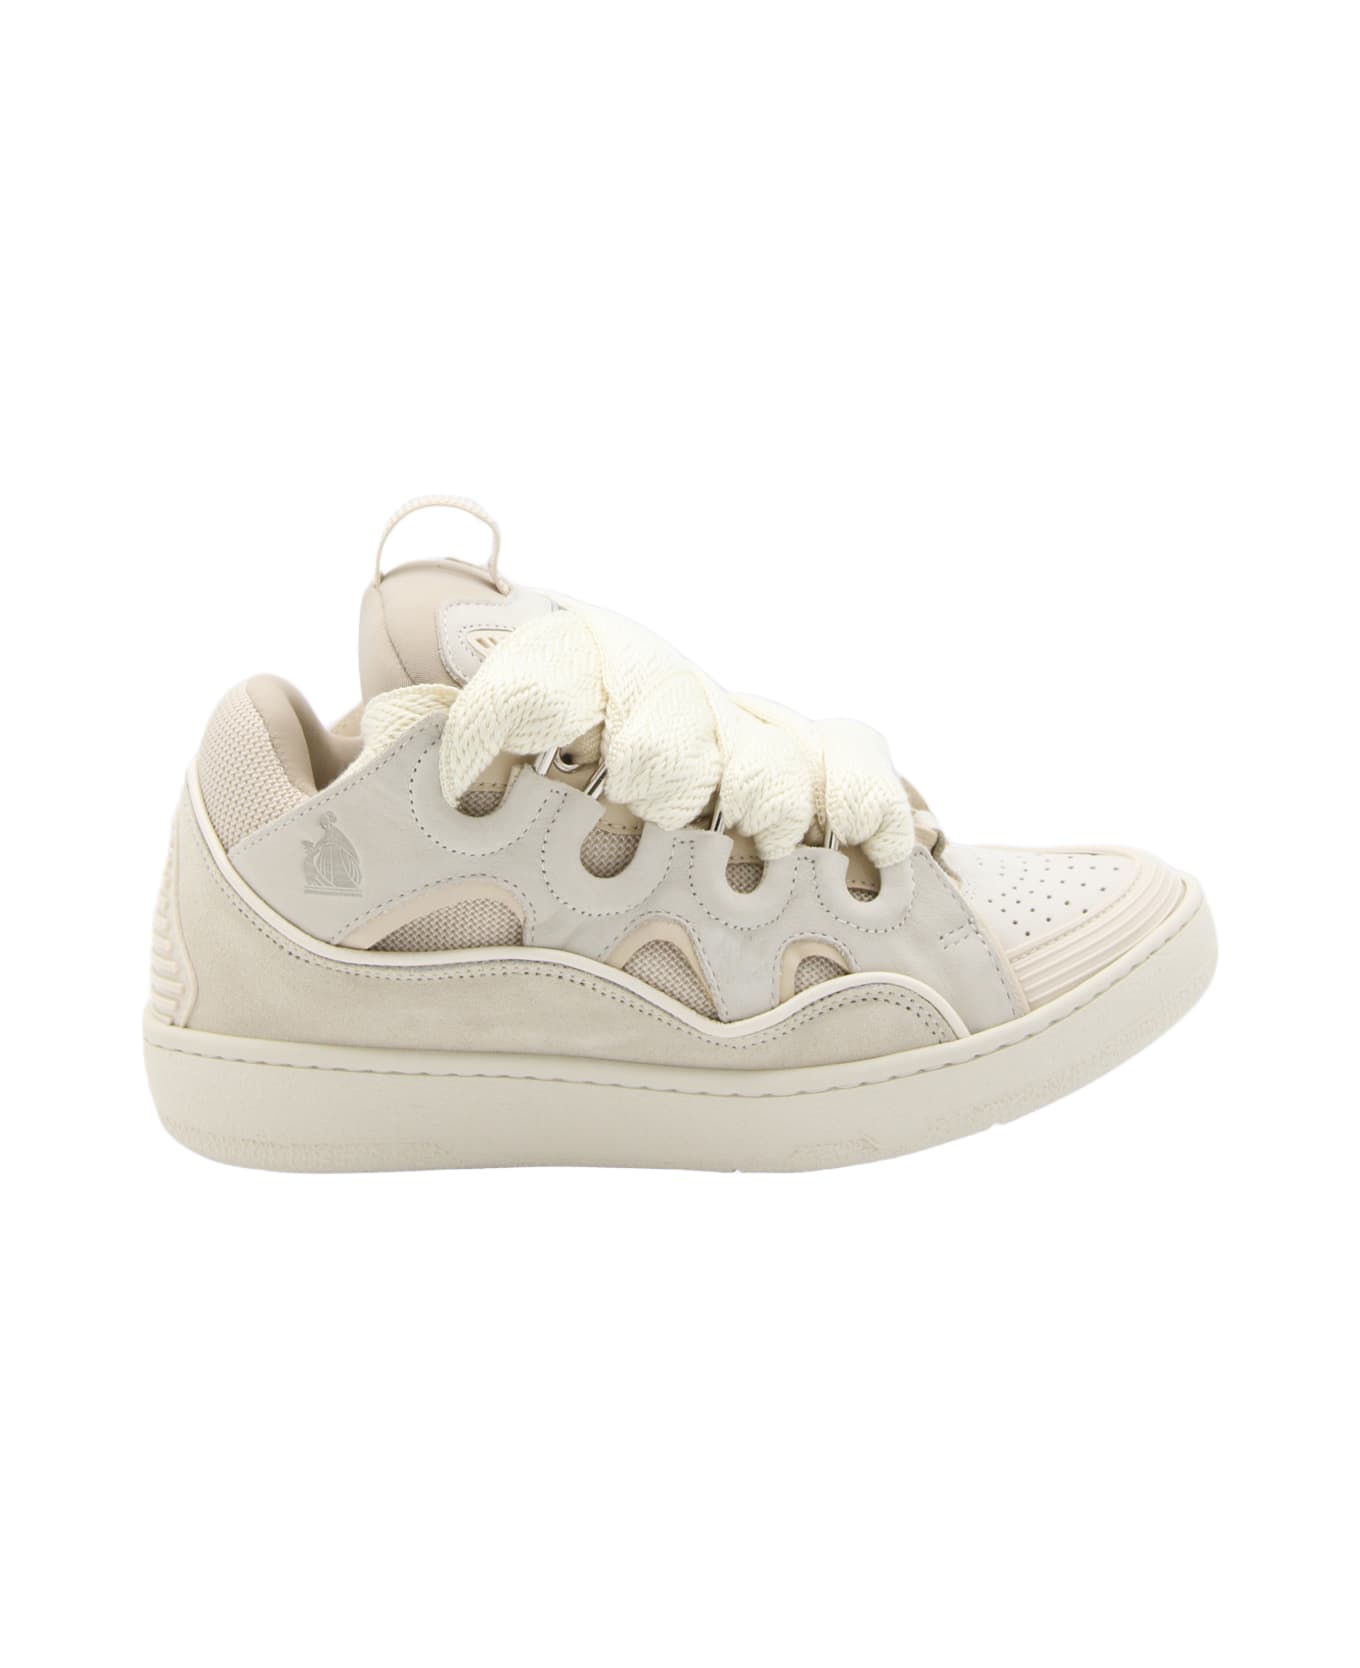 Lanvin White Leather Curb Sneakers - Beige